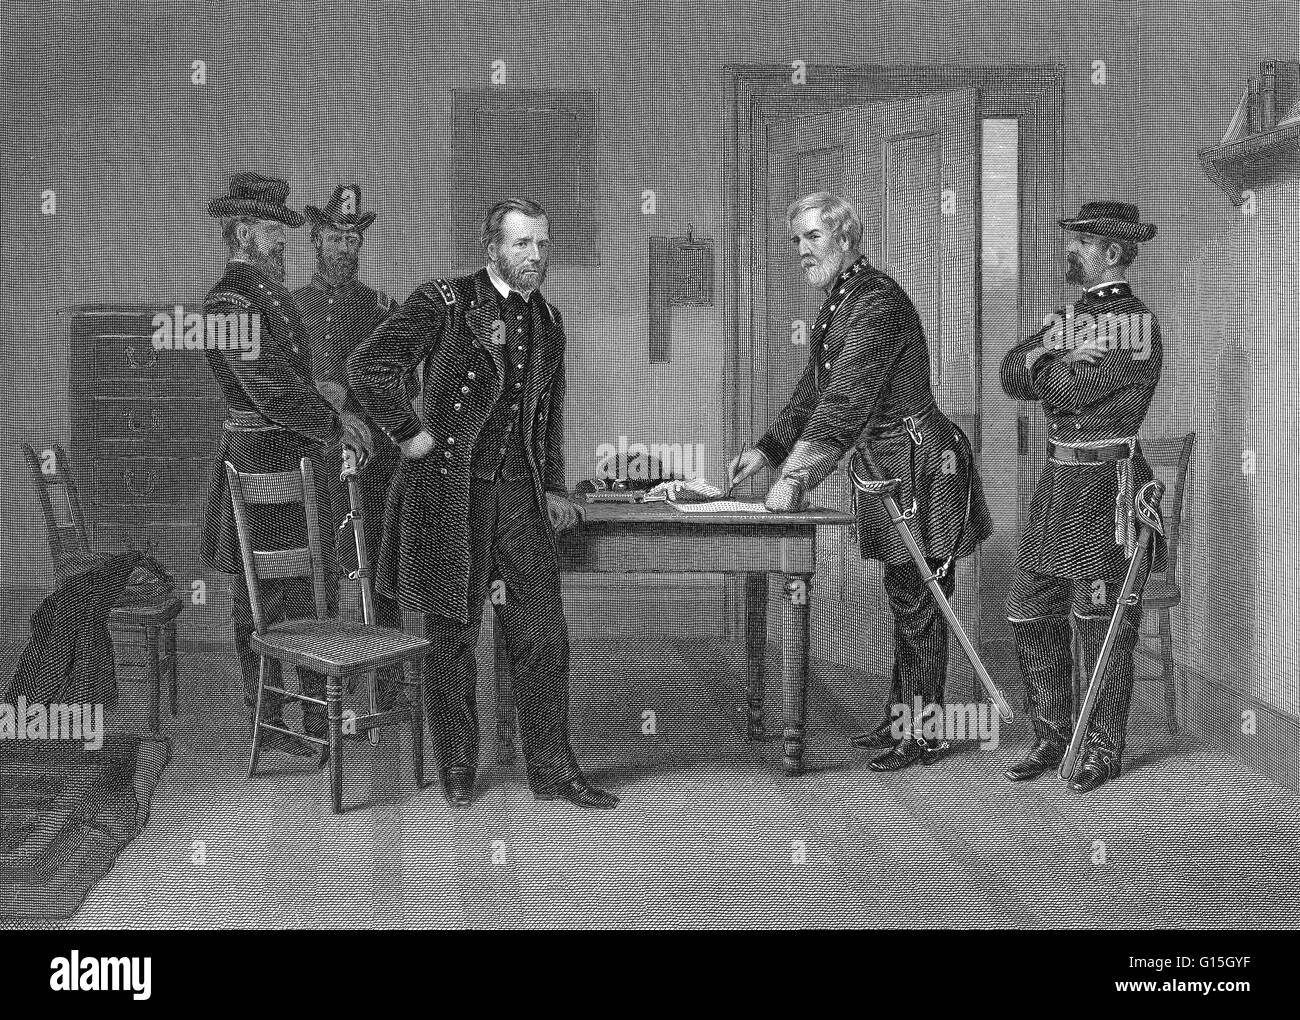 Lee surrenders to Grant surrounded by aides at Appomattox Court House,   Battle of Appomattox Court House, fought on the morning of  April 9, 1865, was the final engagement of Confederate States